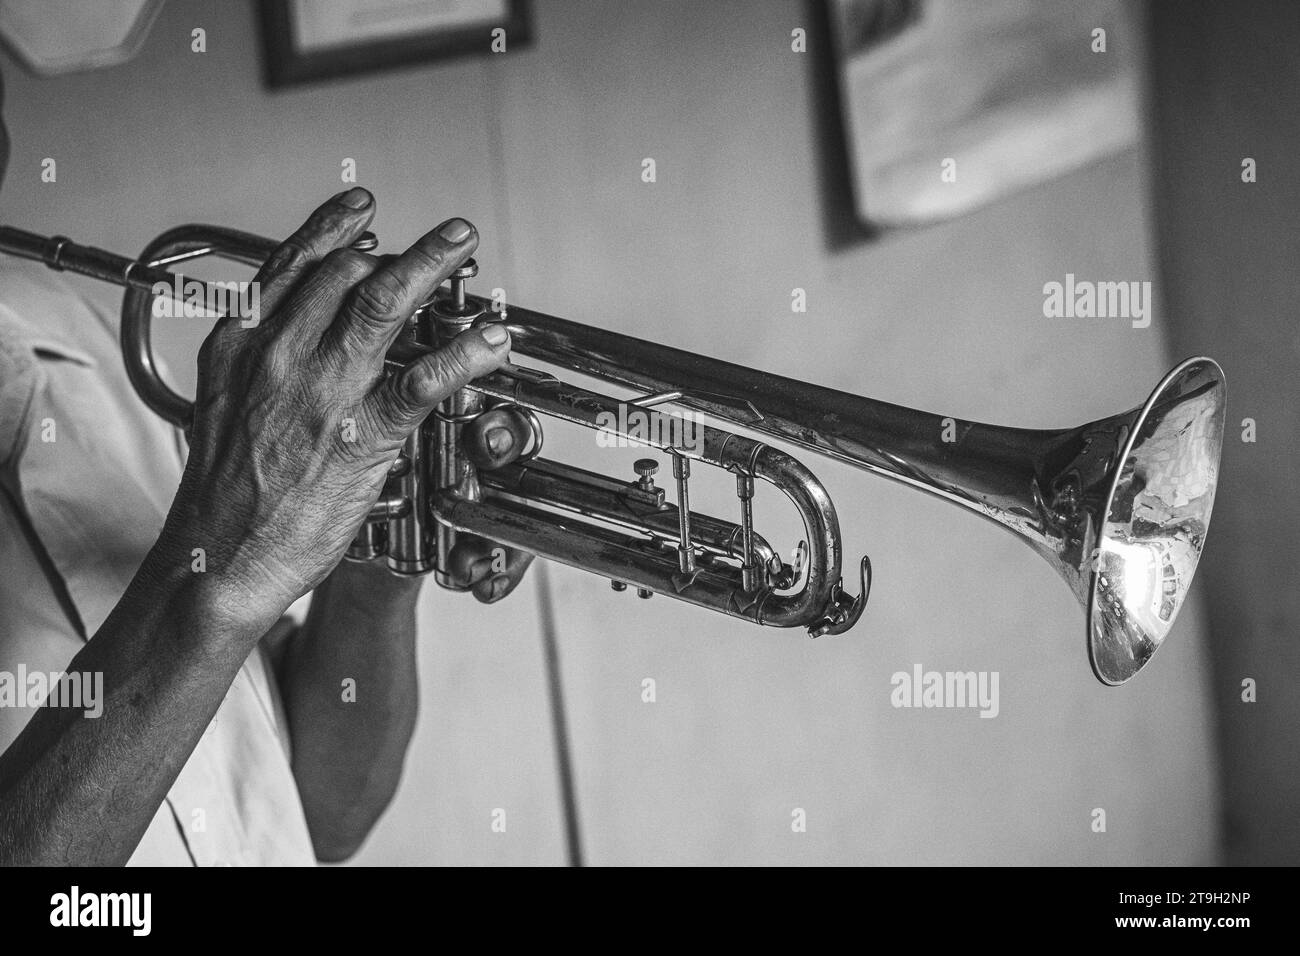 hands with trumpet, mexican music, banda, local musician, Tehuacan, Mexico, 2022 Stock Photo